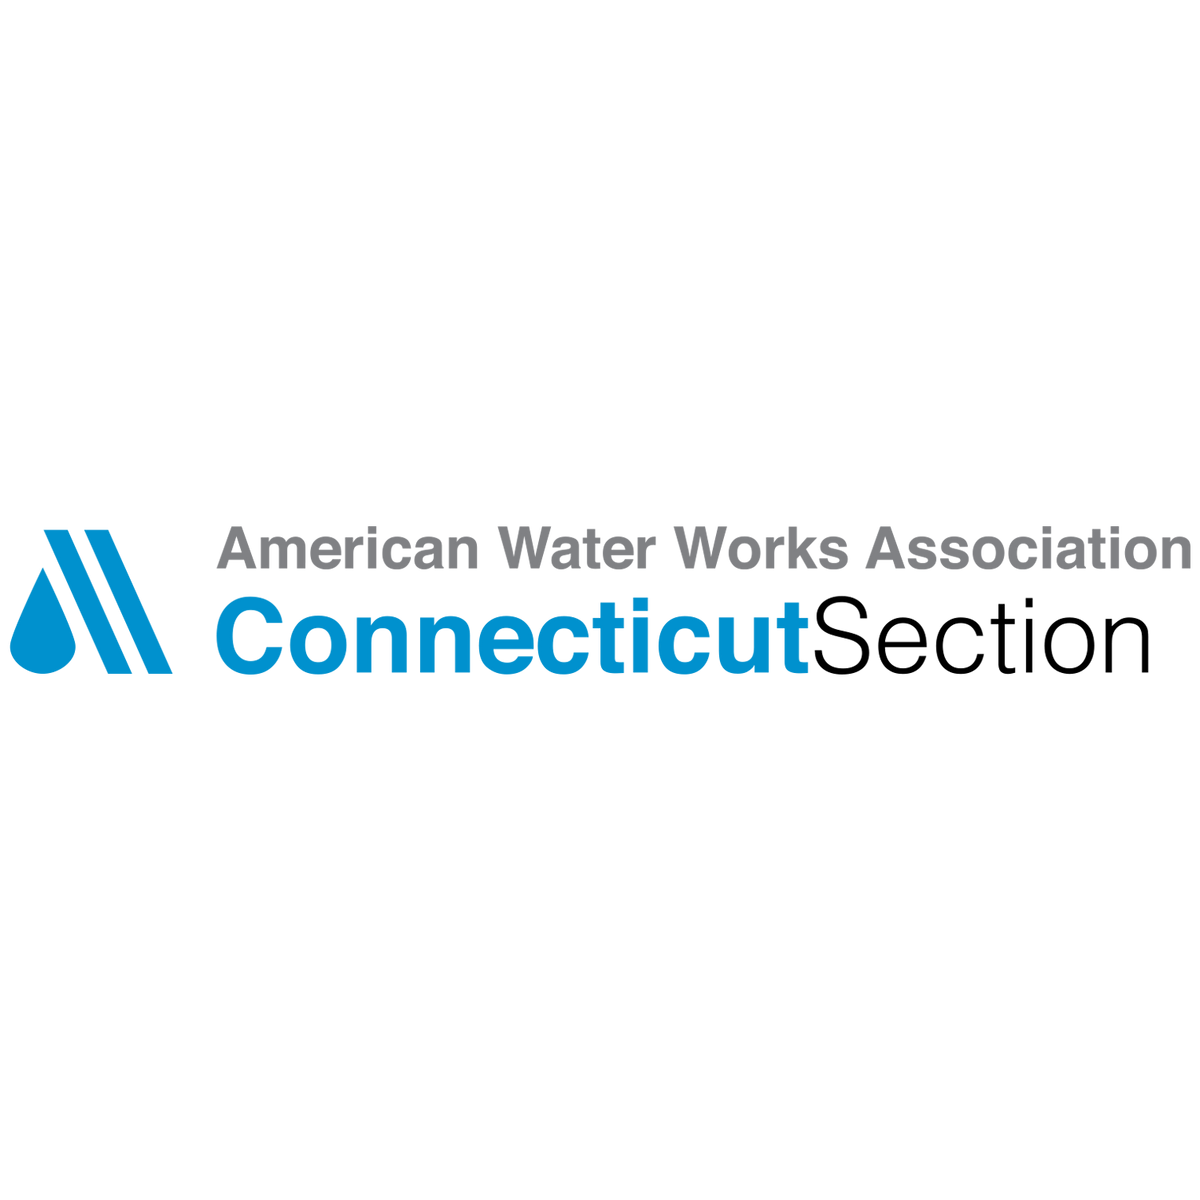 American Water Works Association: Connecticut Section Apparel Store